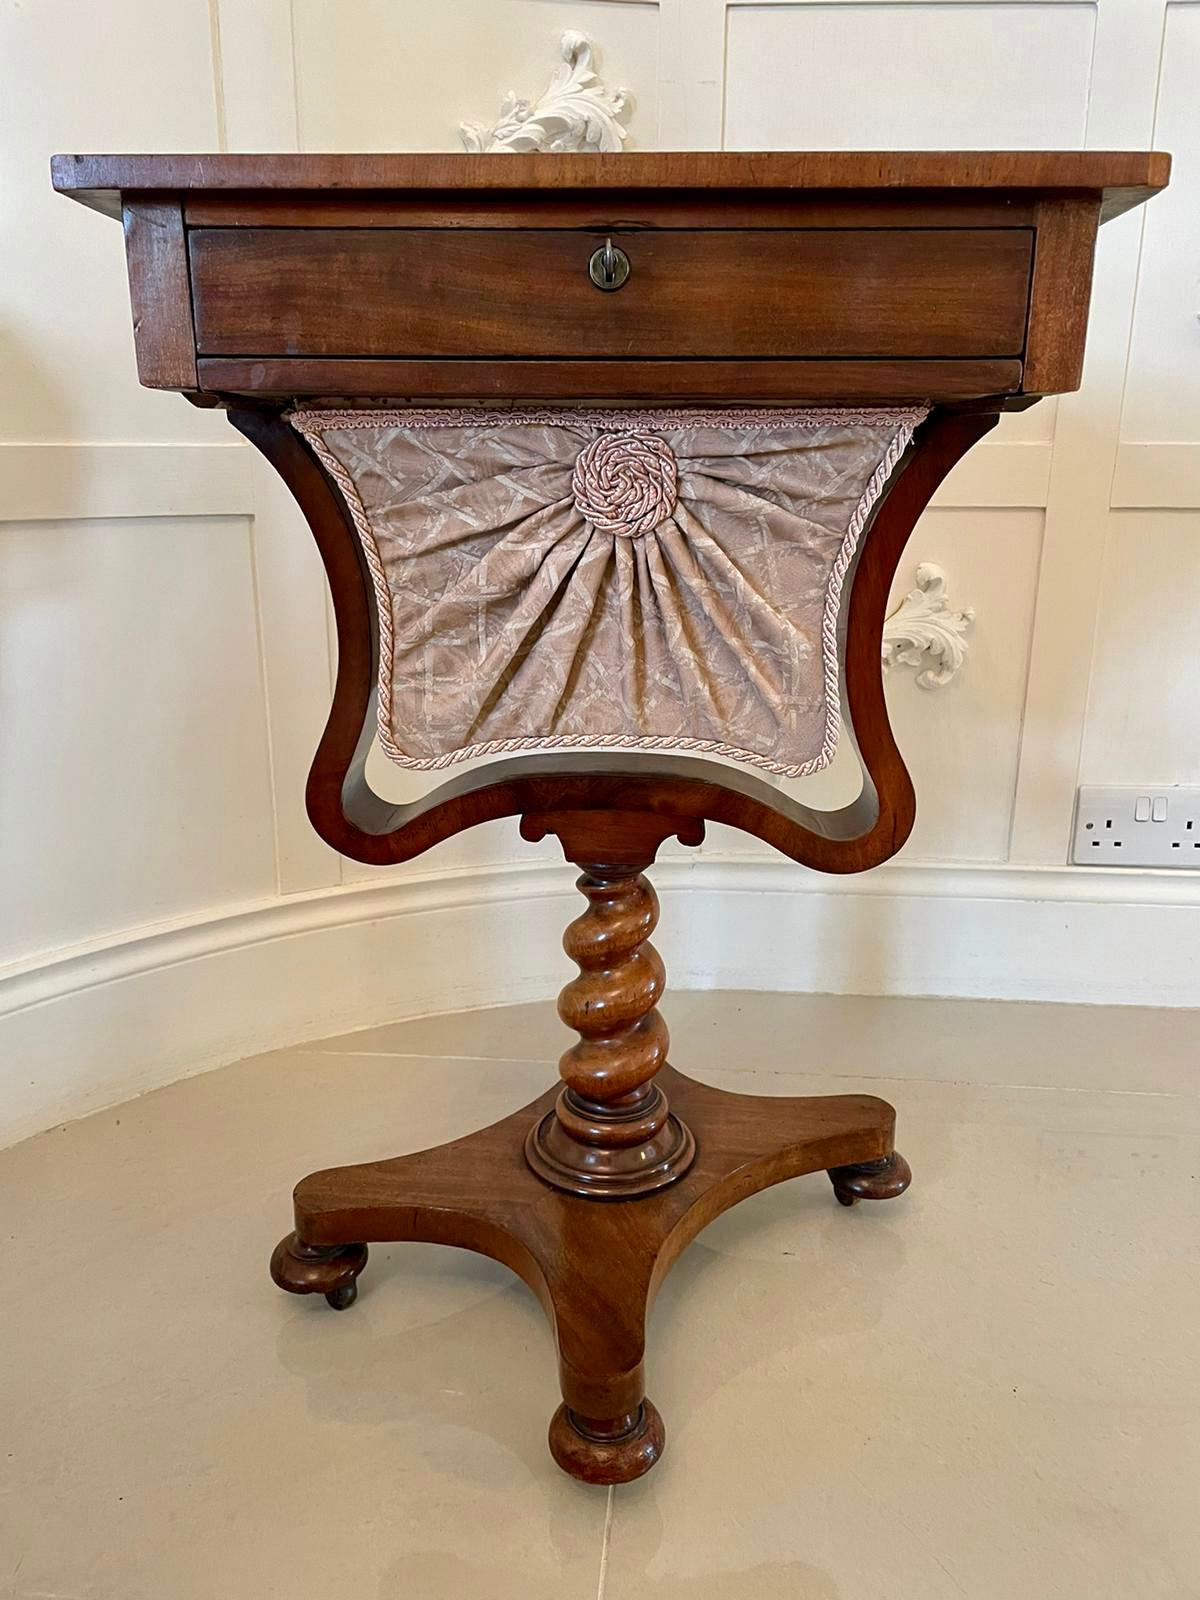 Quality early 19th century antique freestanding William IV rosewood chess top sewing table having a quality rosewood inlaid chess top, one long drawer to the frieze, pretty sliding shaped sewing basket supported by a shaped rosewood frame, raised on